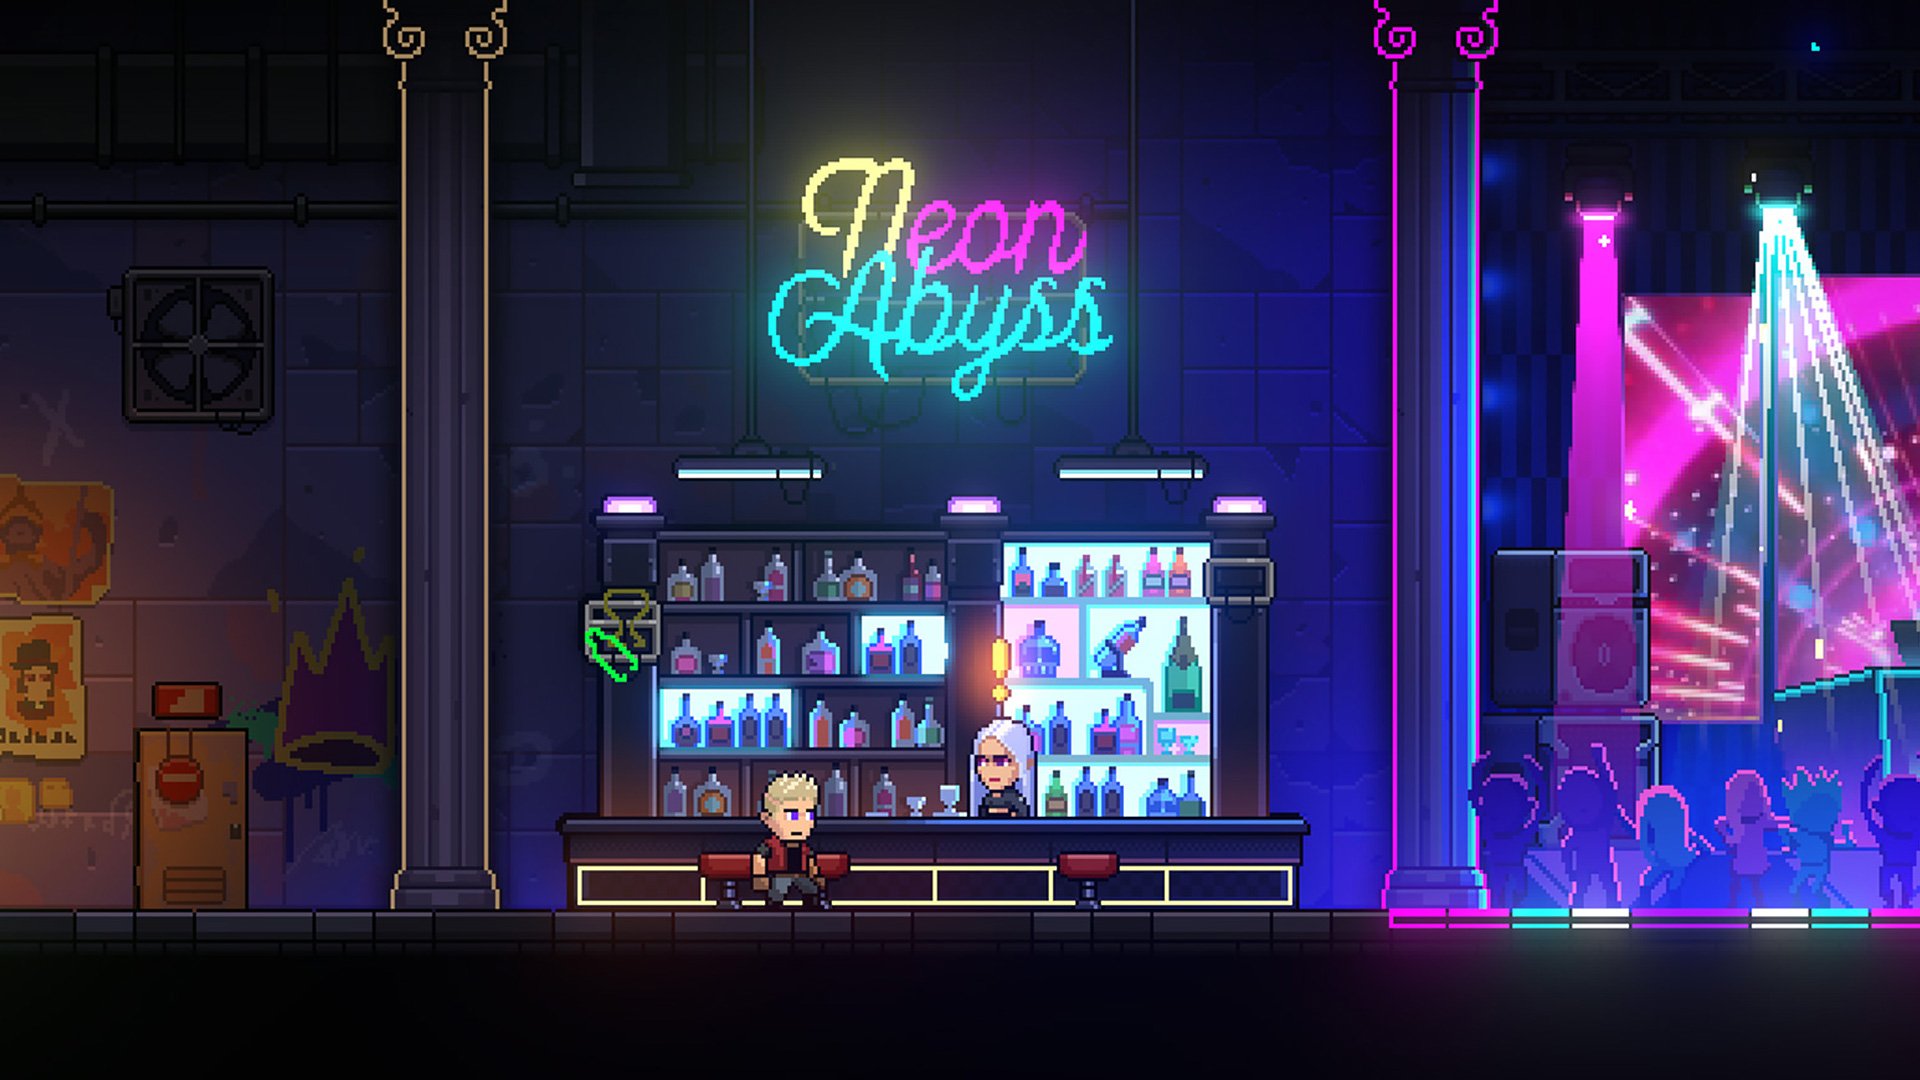 instal the new version for apple Neon Abyss